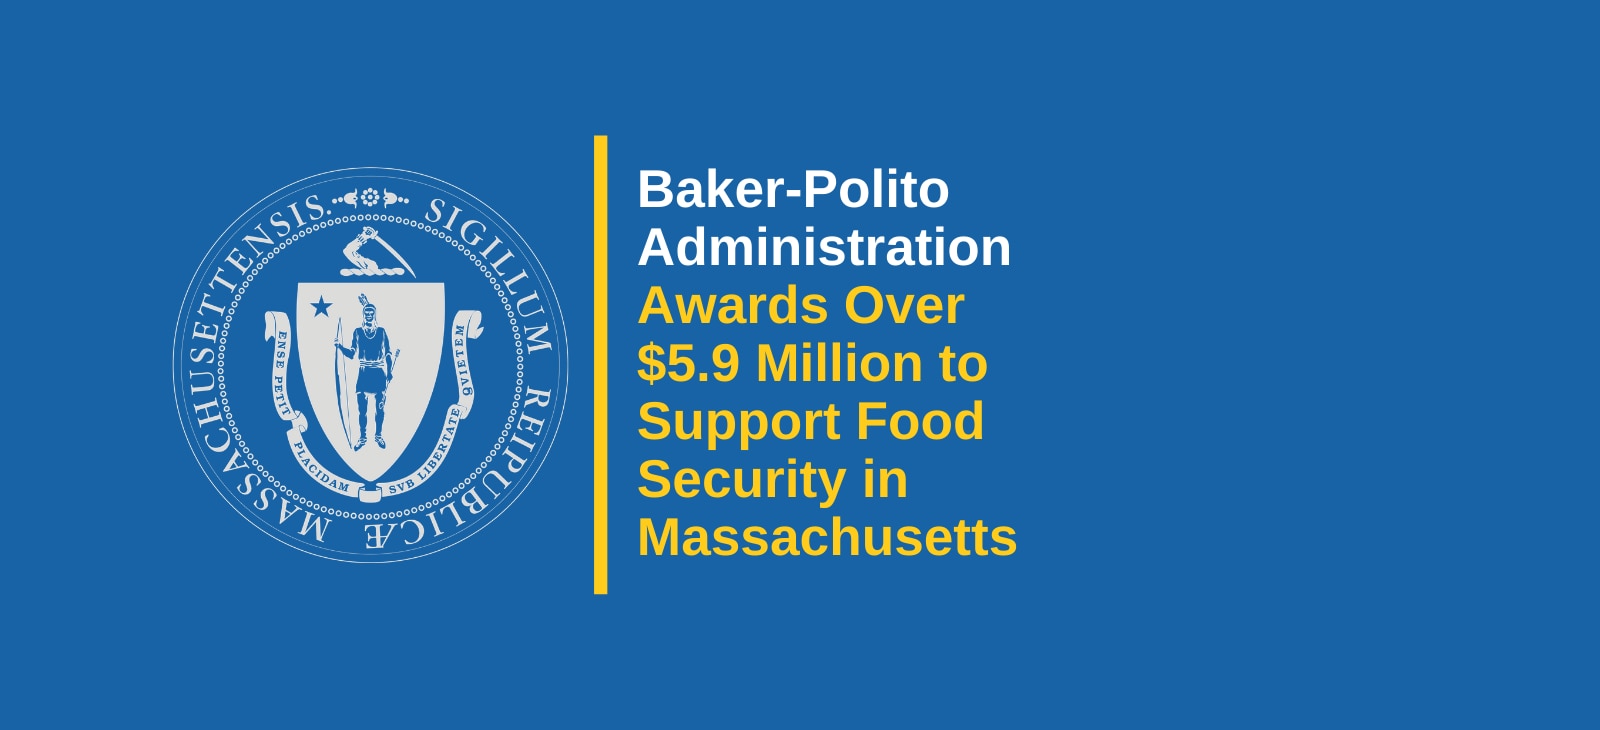 Baker-Polito Administration Awards Over $5.9 Million to Support Food Security in Massachusetts